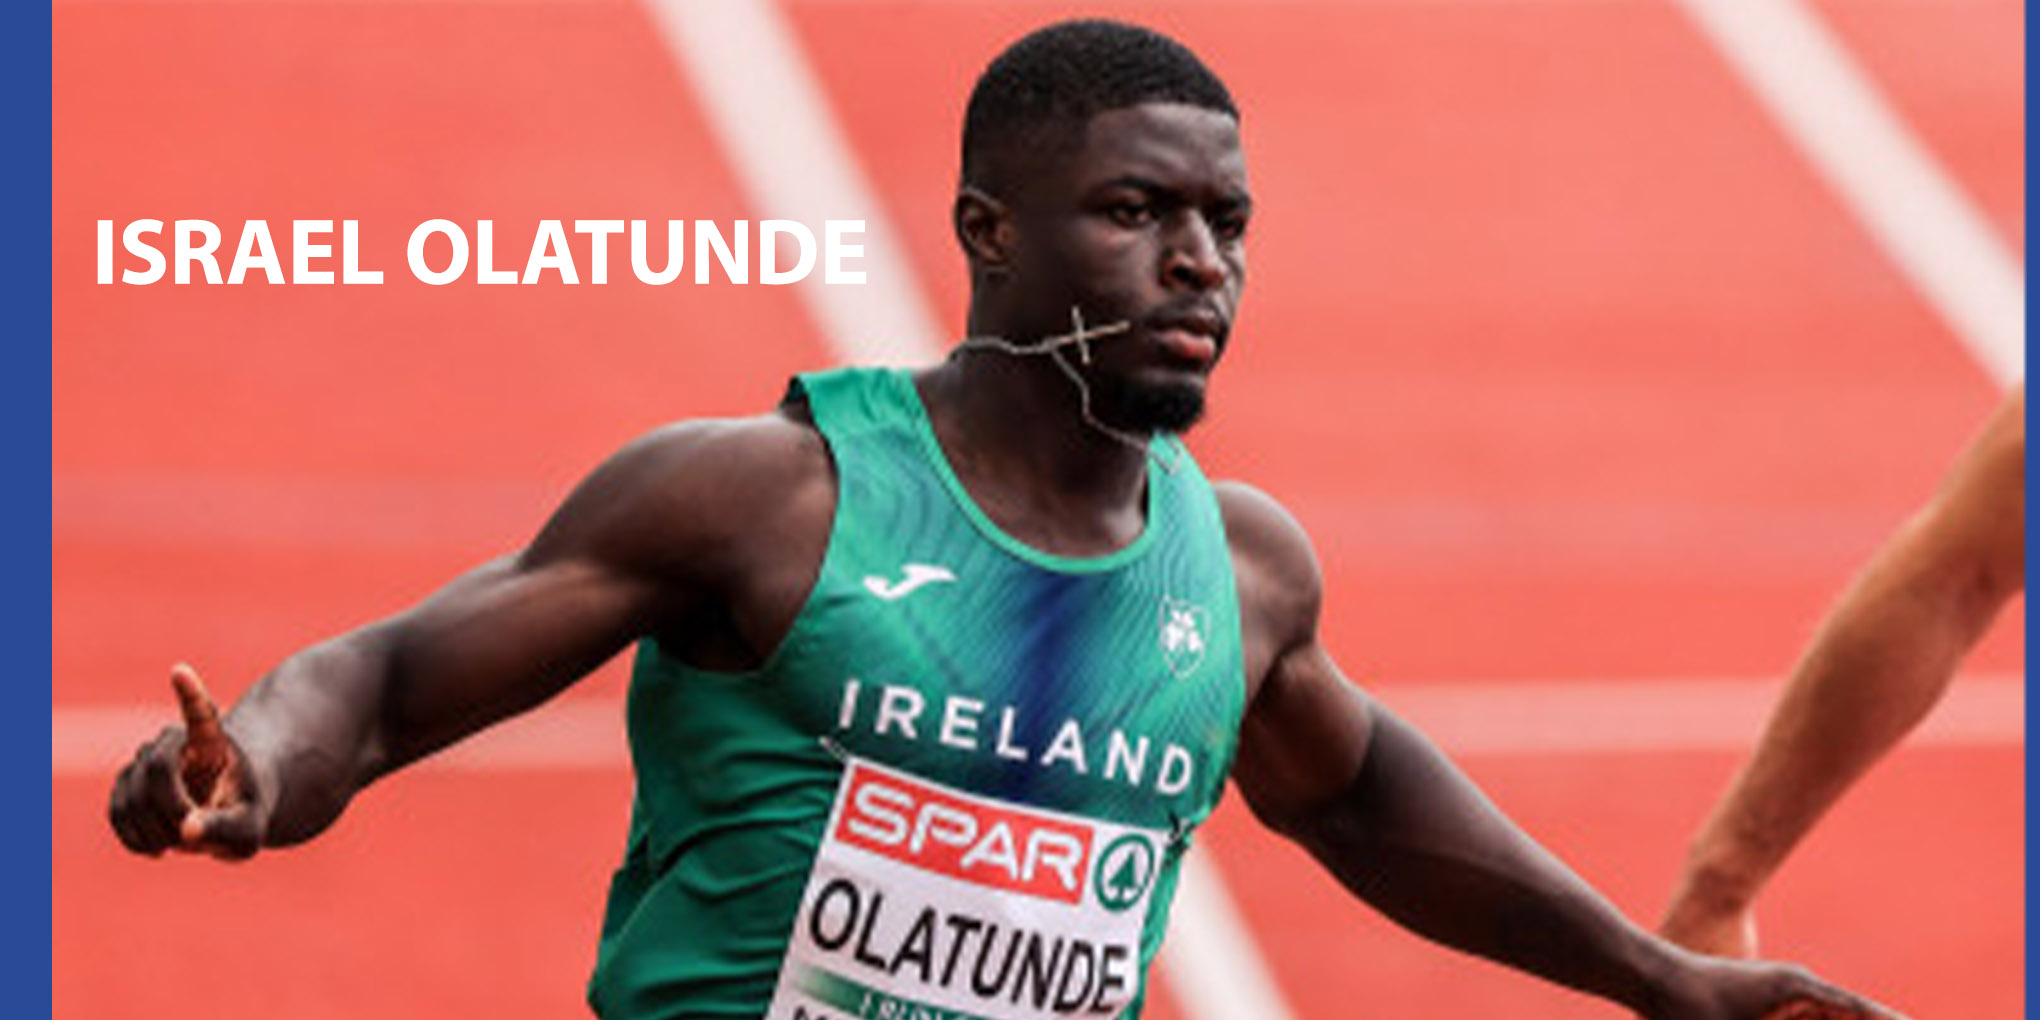 Israel Olatunde of Ireland, who made history, placed sixth in the 100-meter final at the European Championships